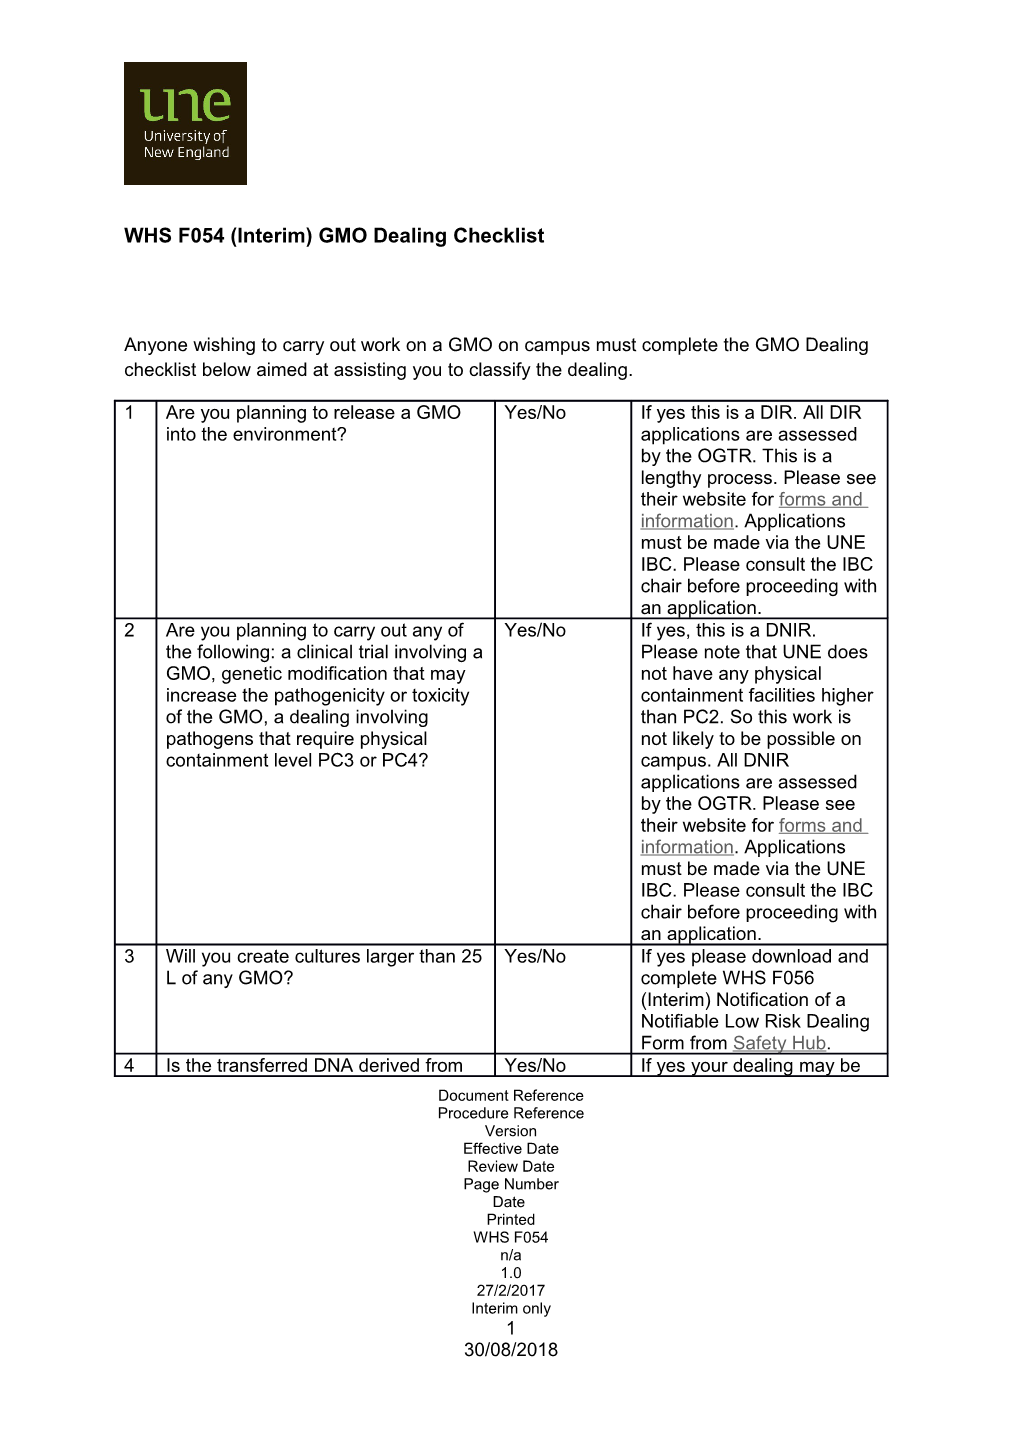 Anyone Wishing to Carry out Work on a GMO on Campus Must Complete the GMO Dealing Checklist